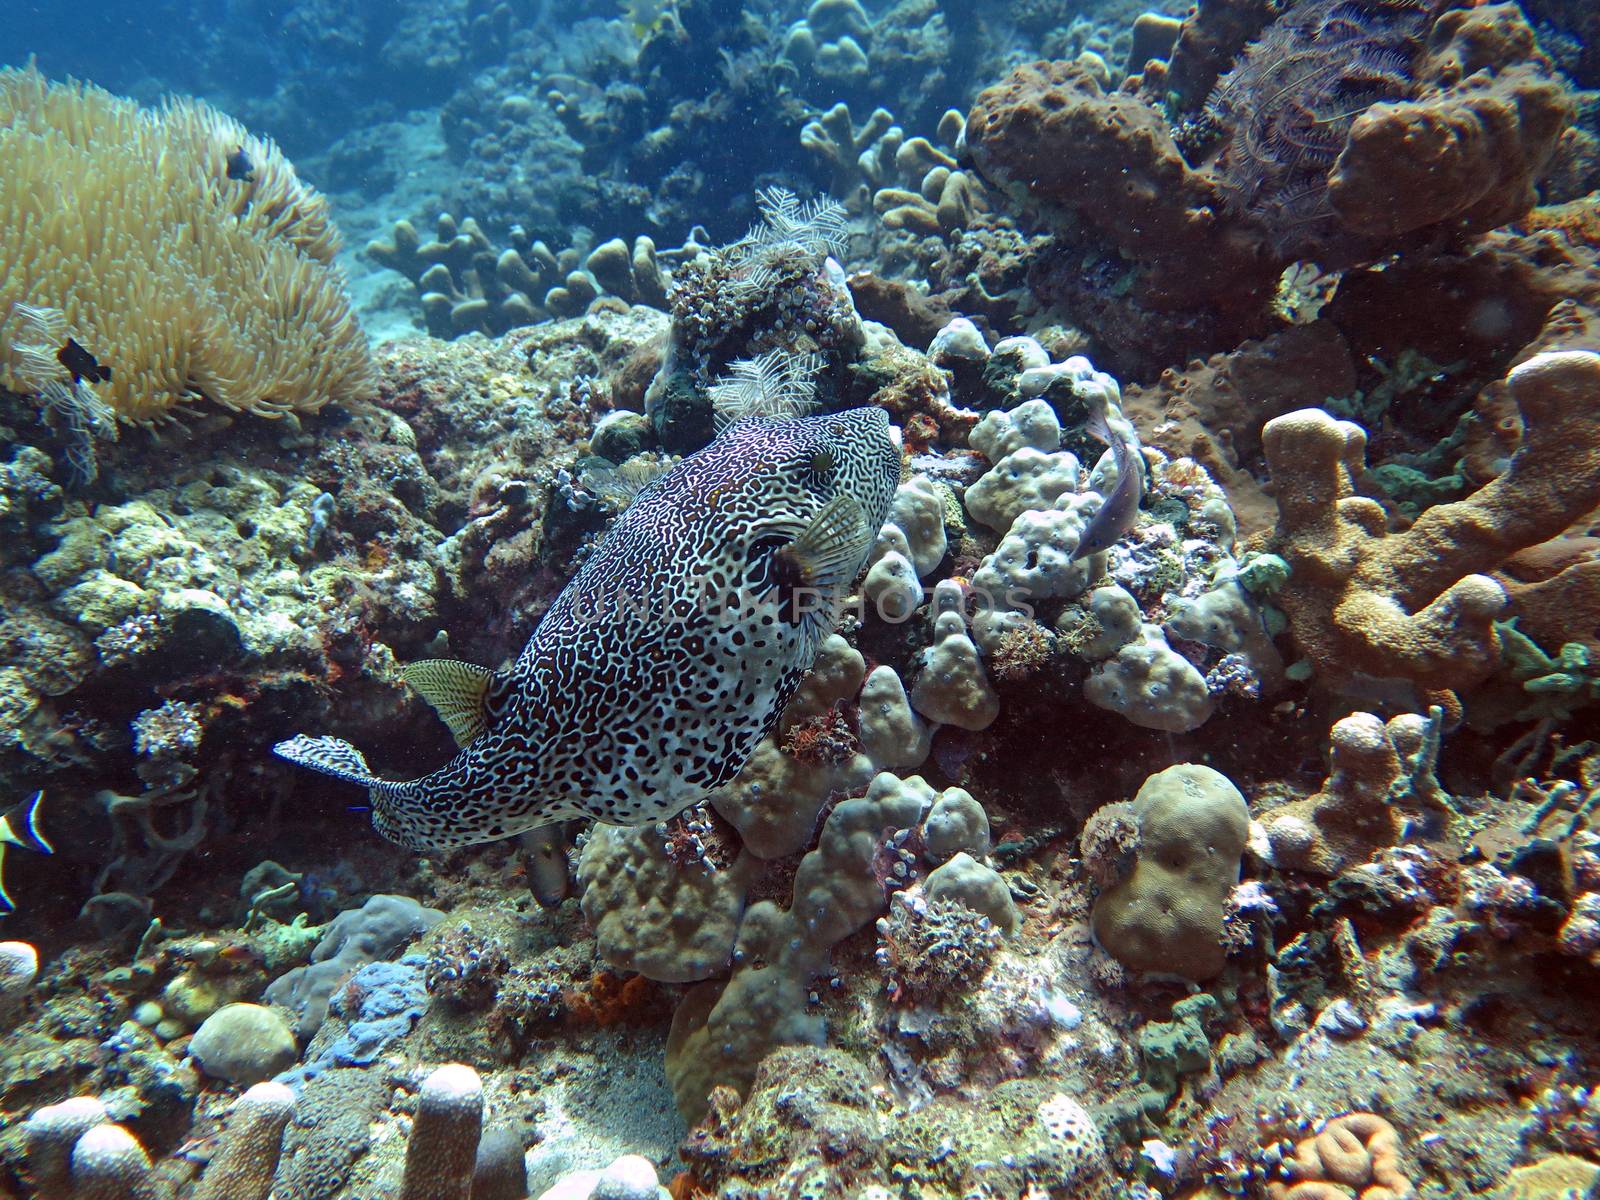 Thriving coral reef alive with marine life and fish, Bali.